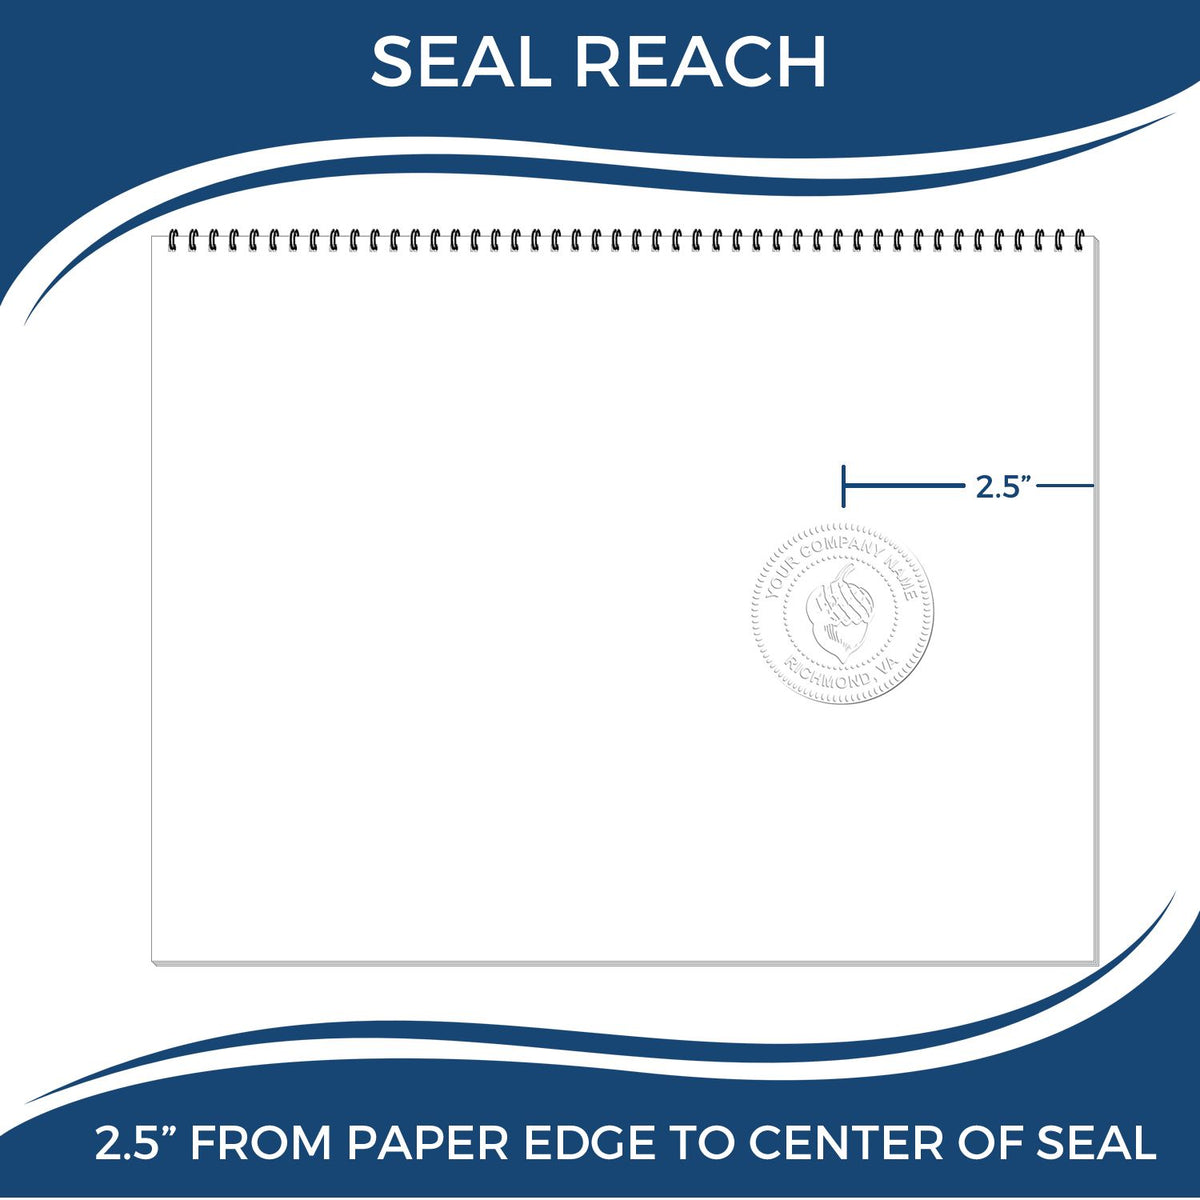 An infographic showing the seal reach which is represented by a ruler and a miniature seal image of the Long Reach West Virginia PE Seal